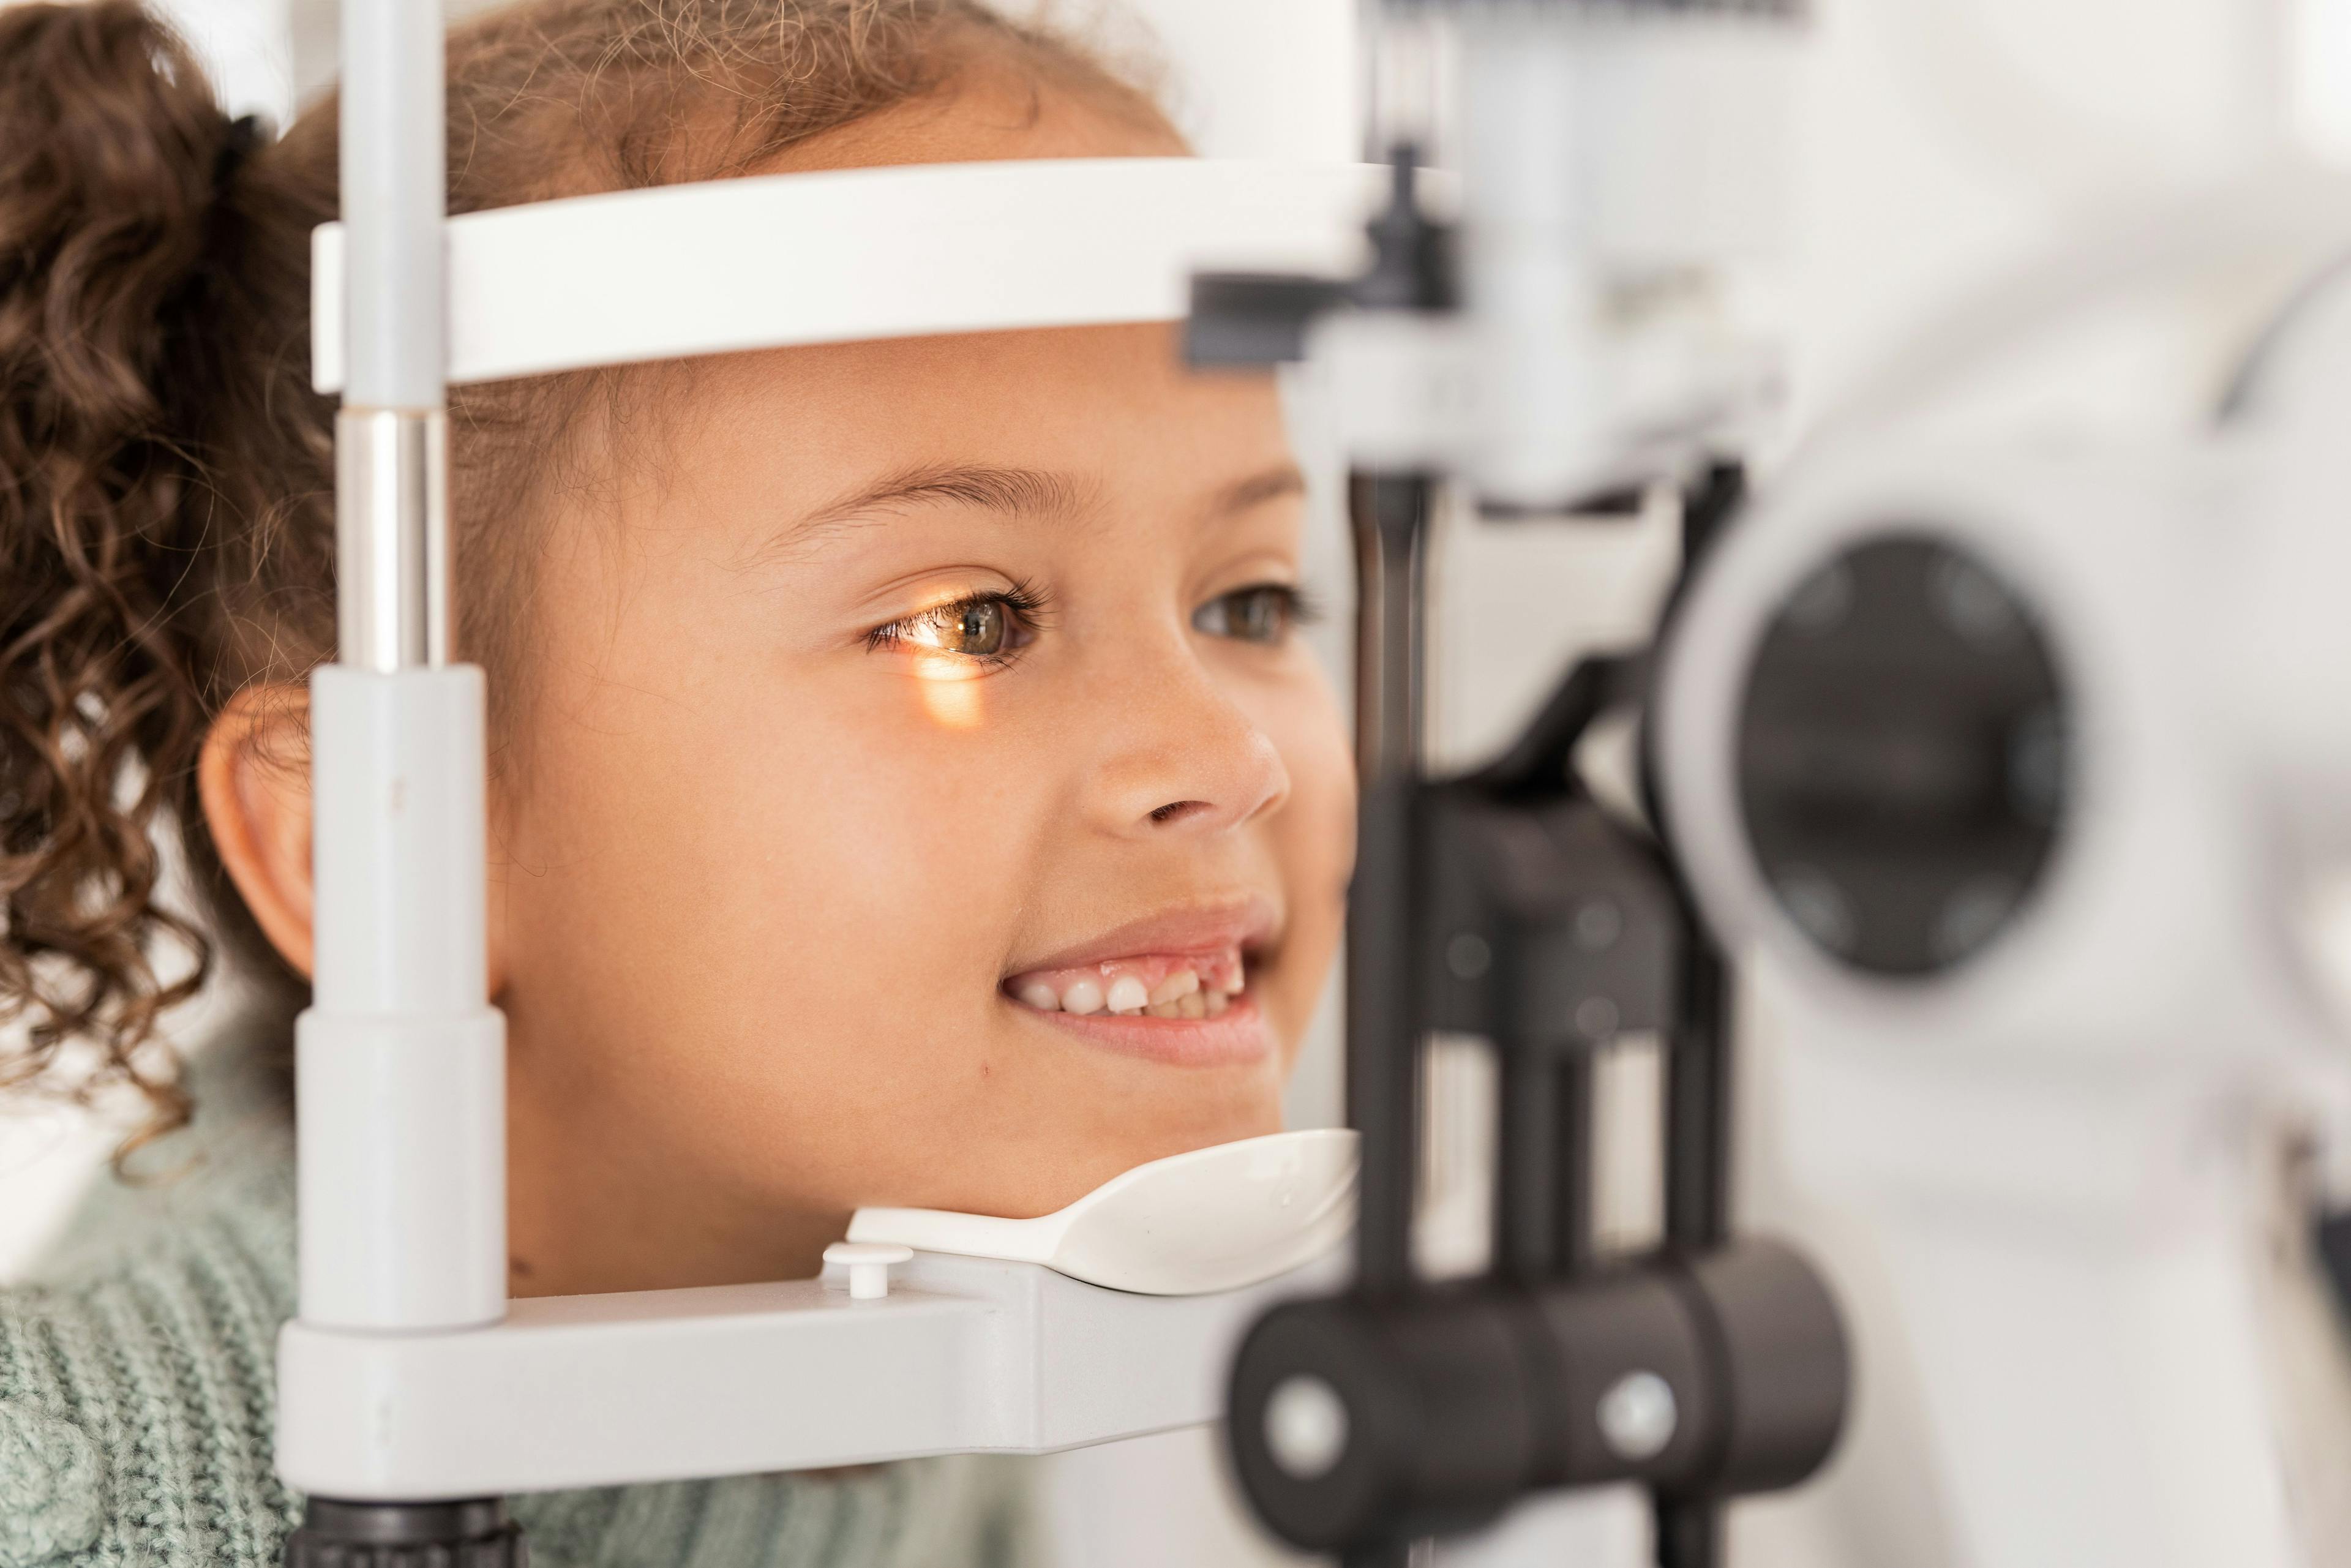 The event welcomes children ages 6 – 17 from Philadelphia and surrounding counties for free eye screenings at the Hospital, and then to return to pick up free eye glasses fitted to their needs.